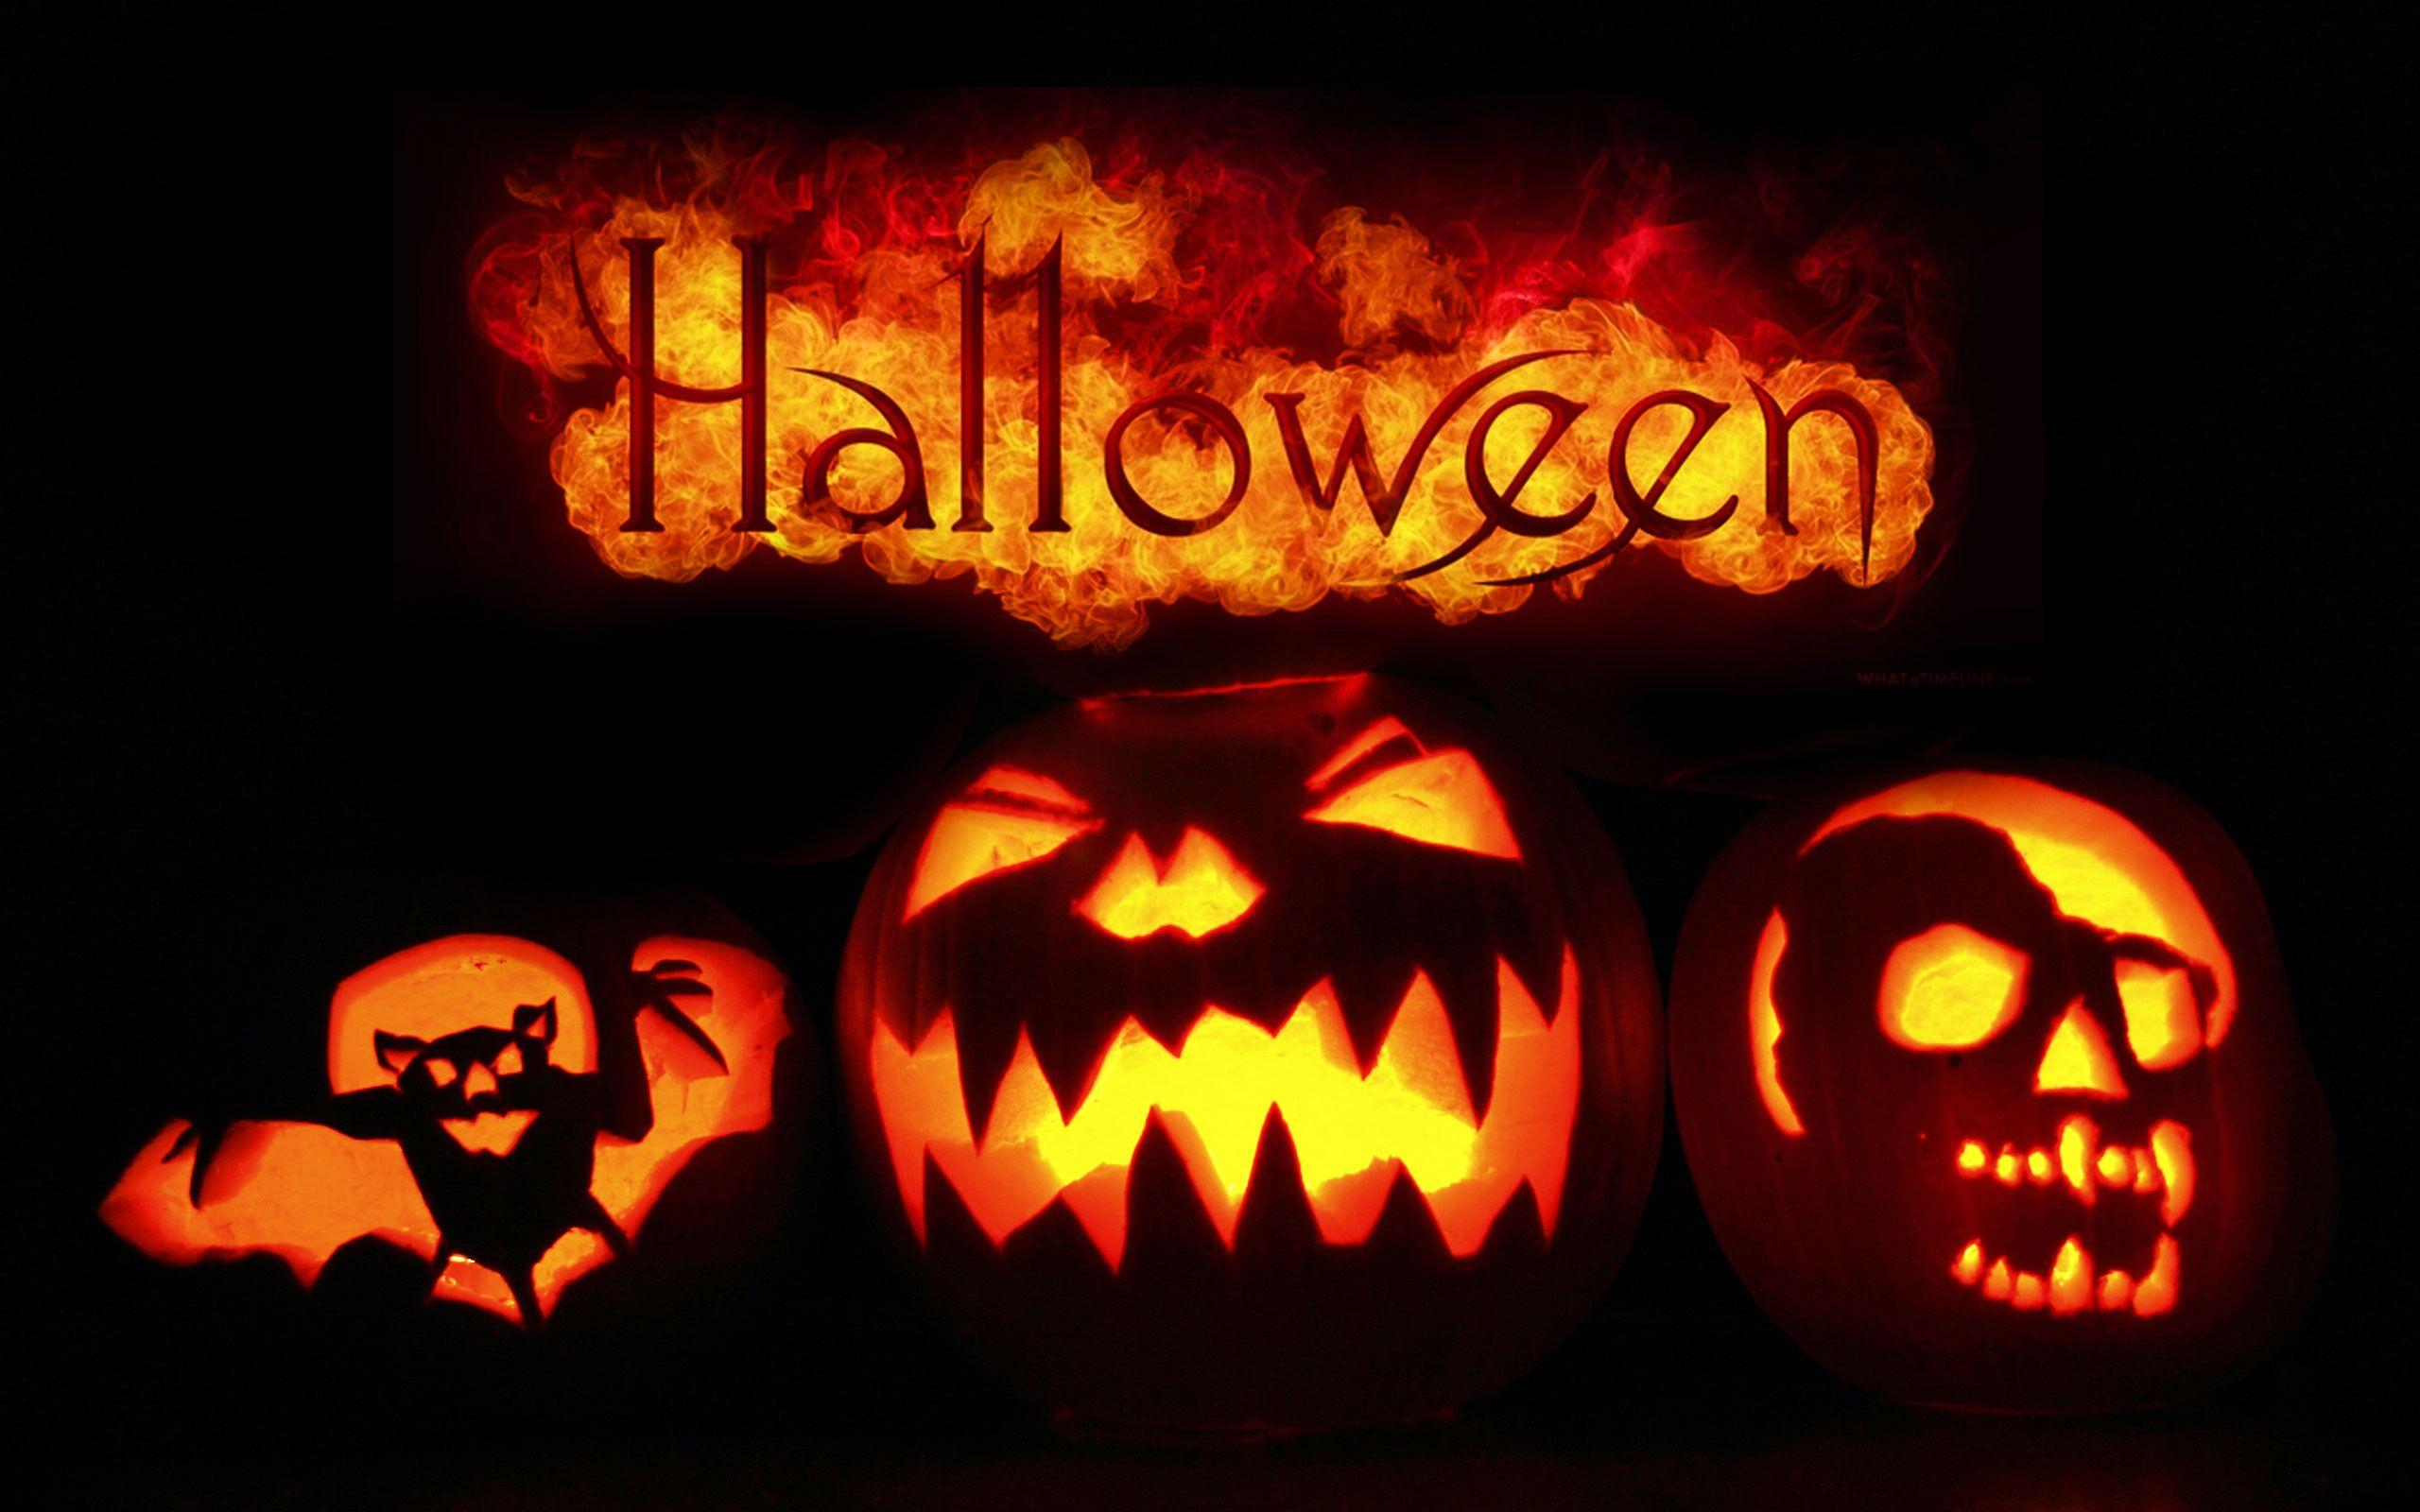 Scary Happy Halloween 2015 Image, Background, Wallpaper, Ideas